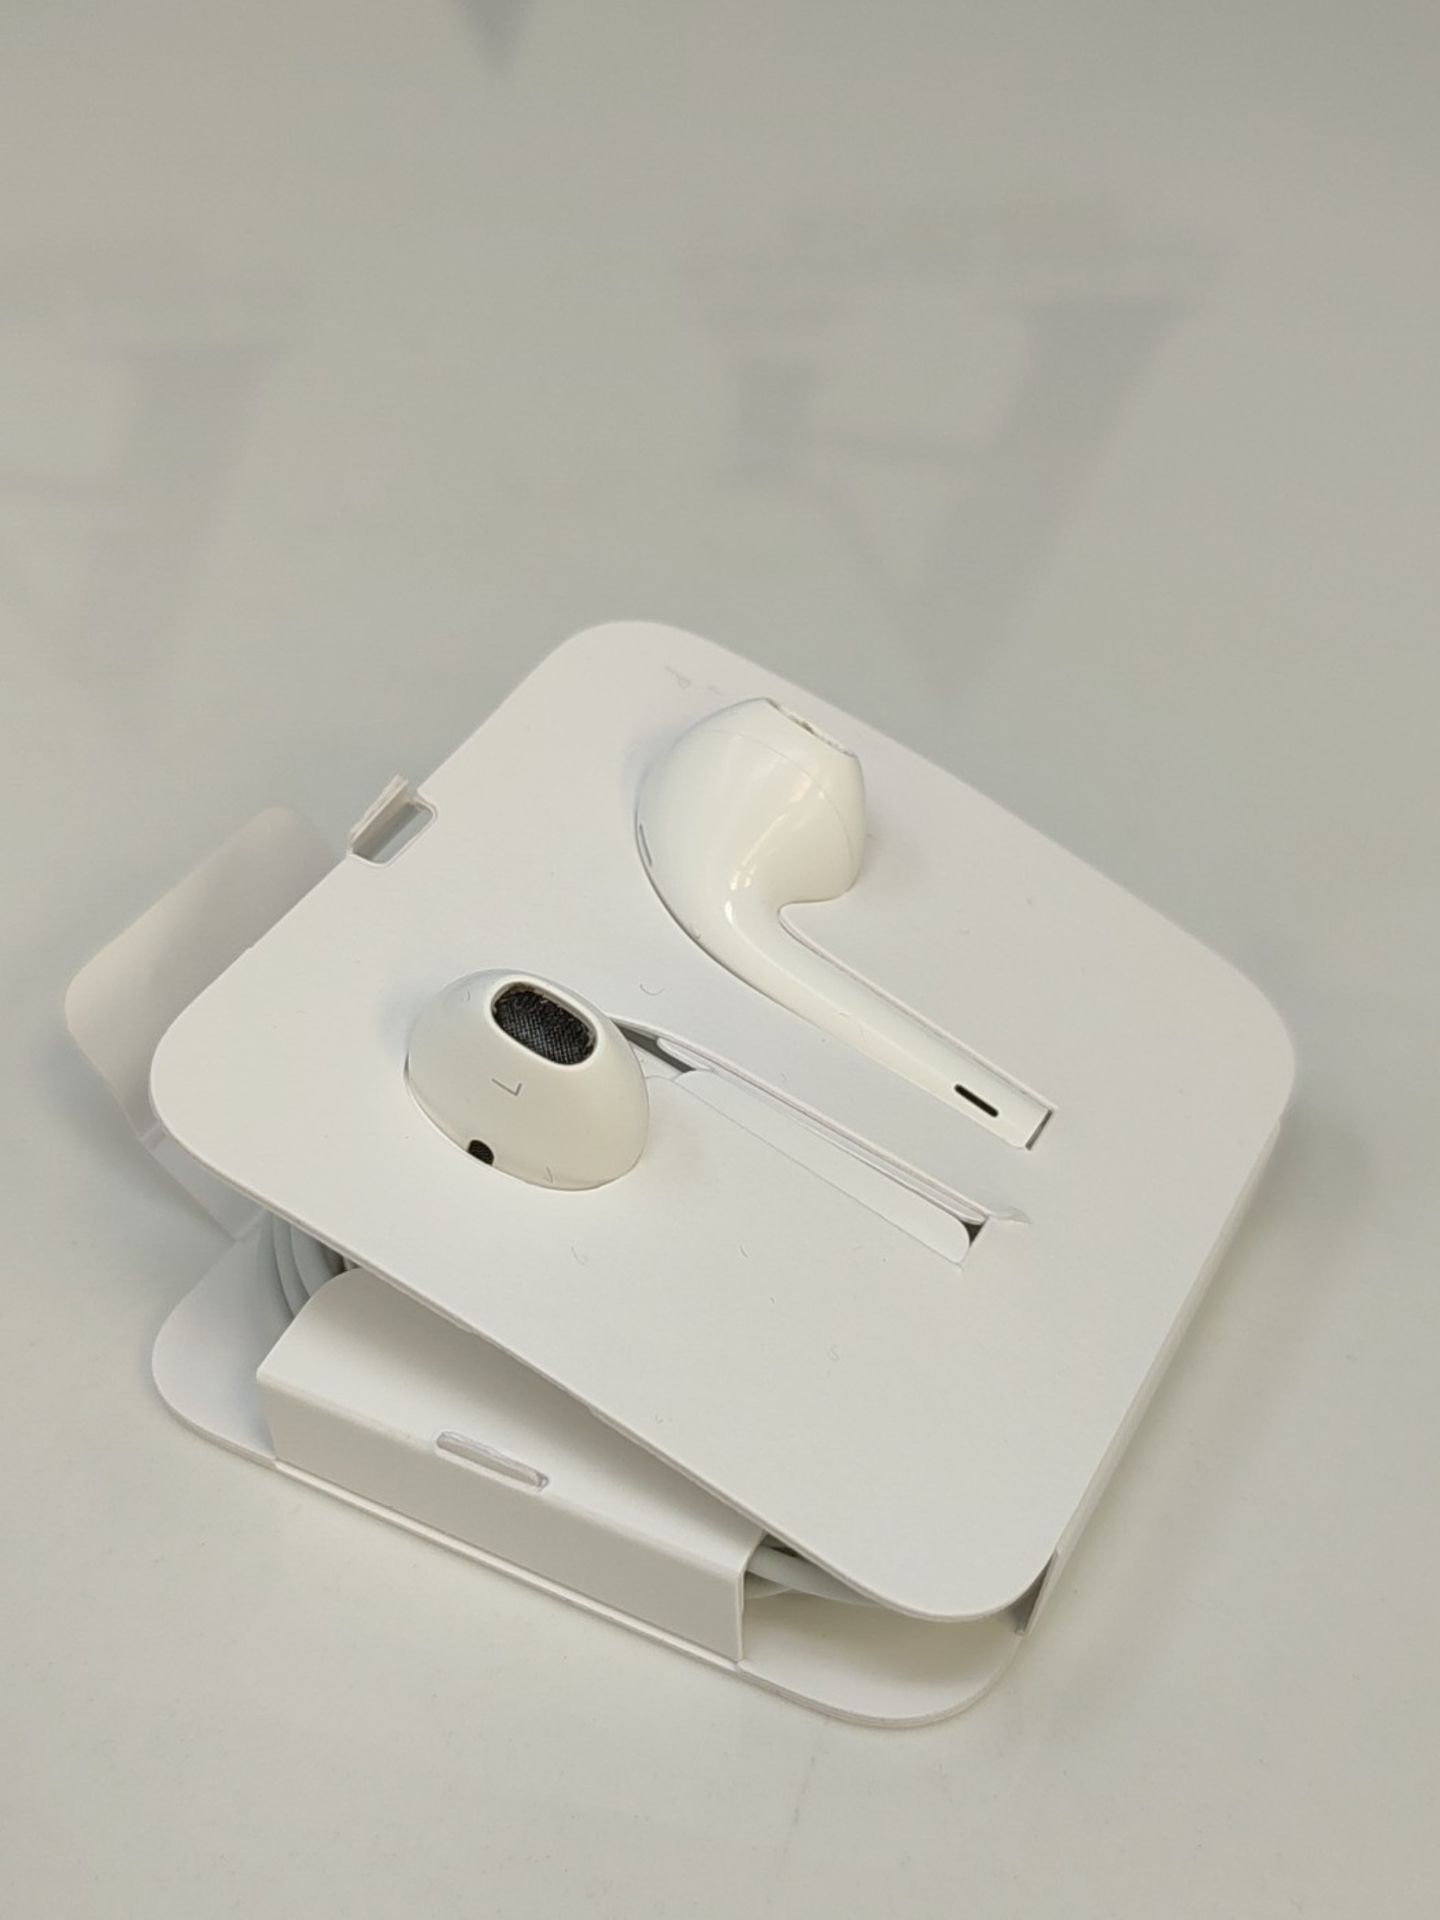 Apple EarPods with Lightning connector - Image 3 of 3